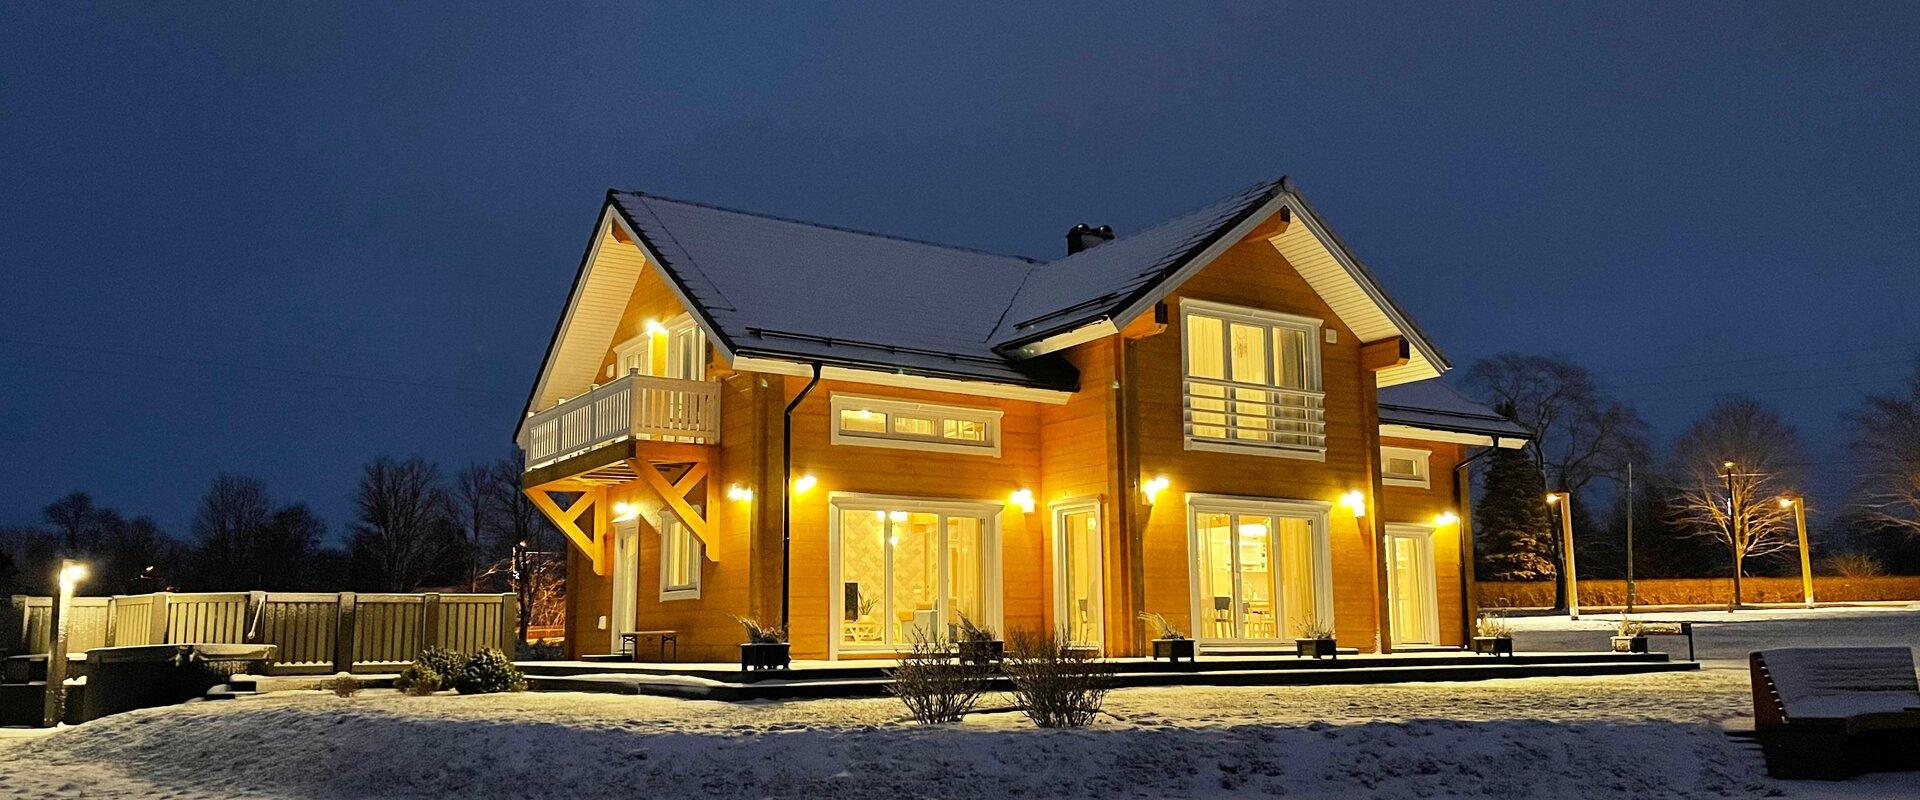 Karukella Holiday house, view of the house from outside at dusk in winter